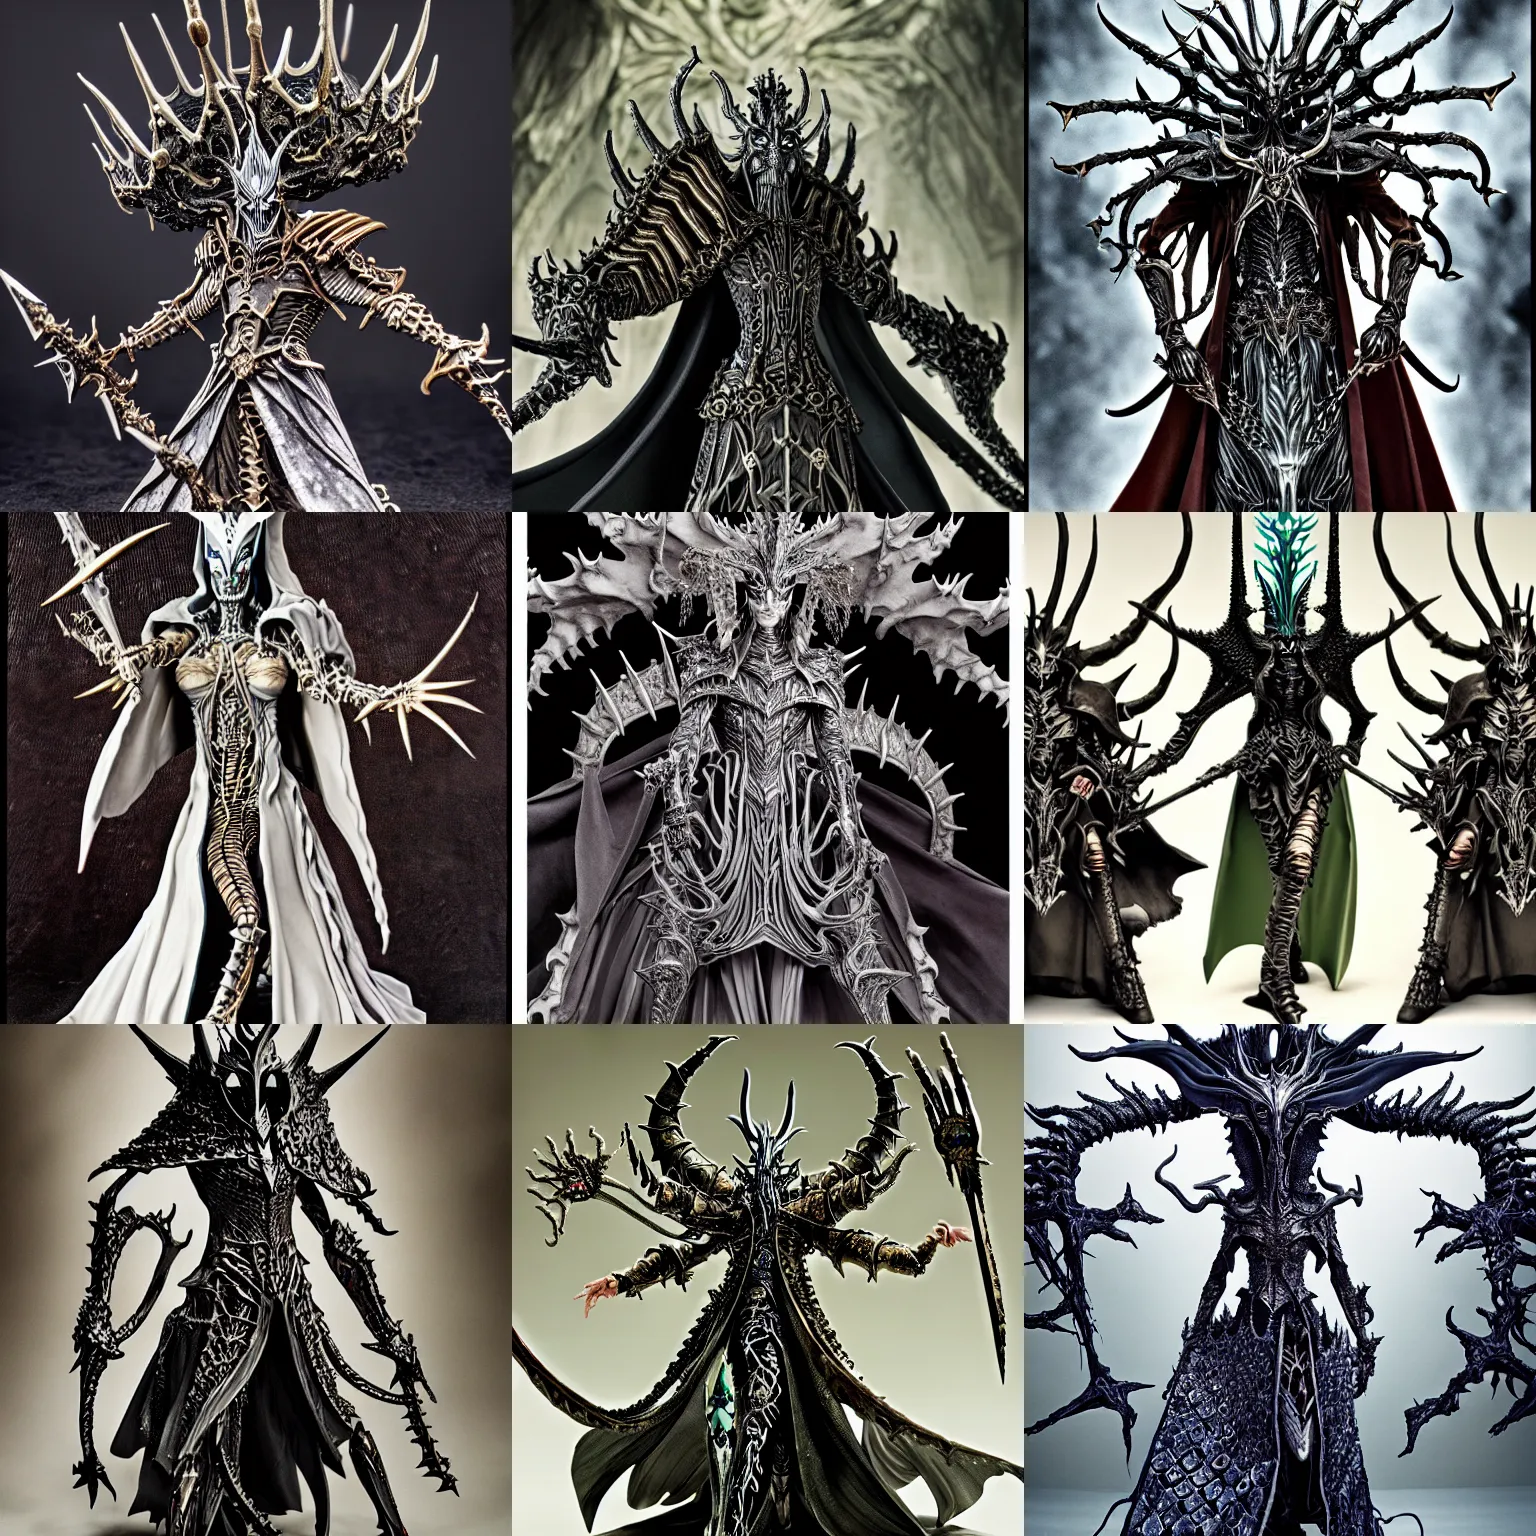 Prompt: nagash editorial, warhammer nagash haute couture, godlike lich by iris van herpen leading his army, still image from lord of the rings